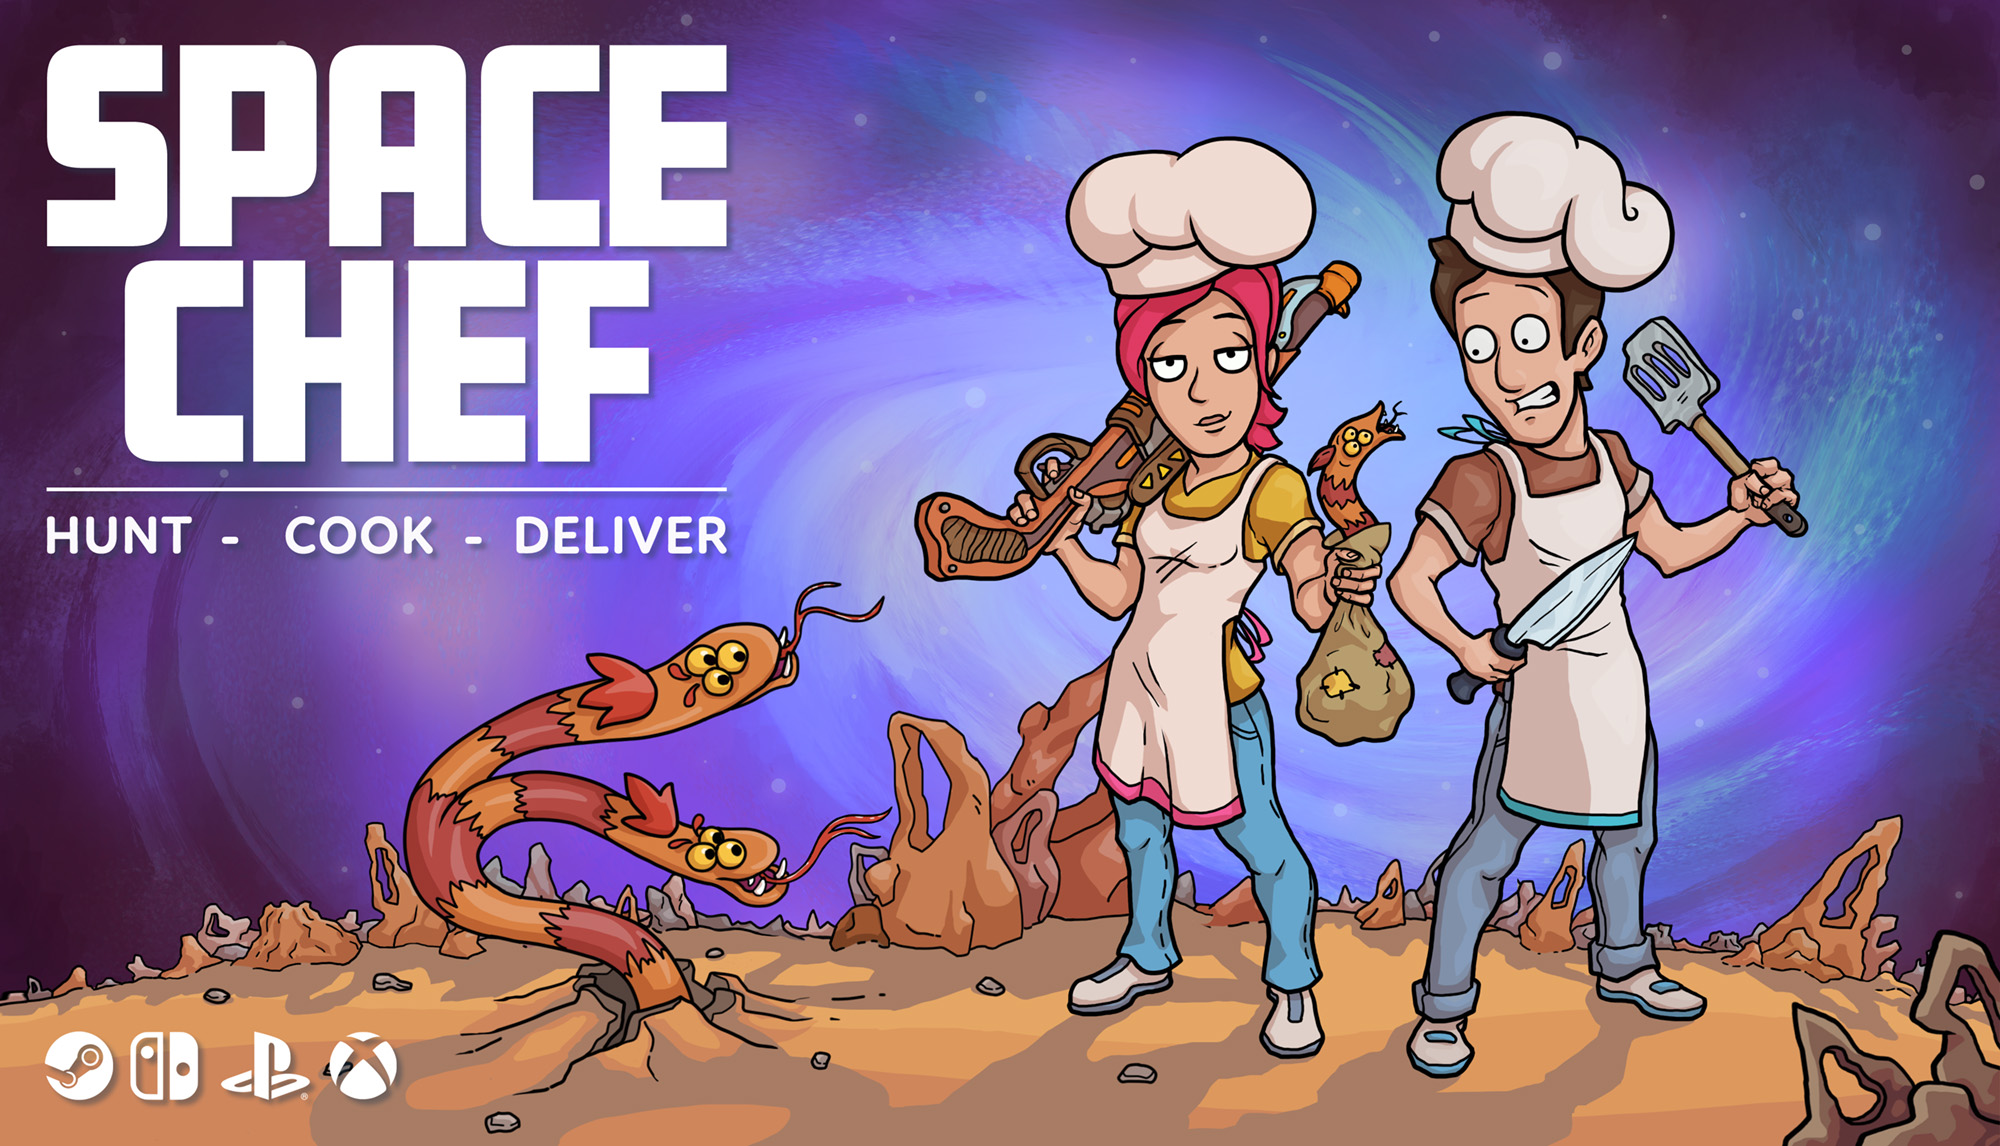 Space Chef Cover Image